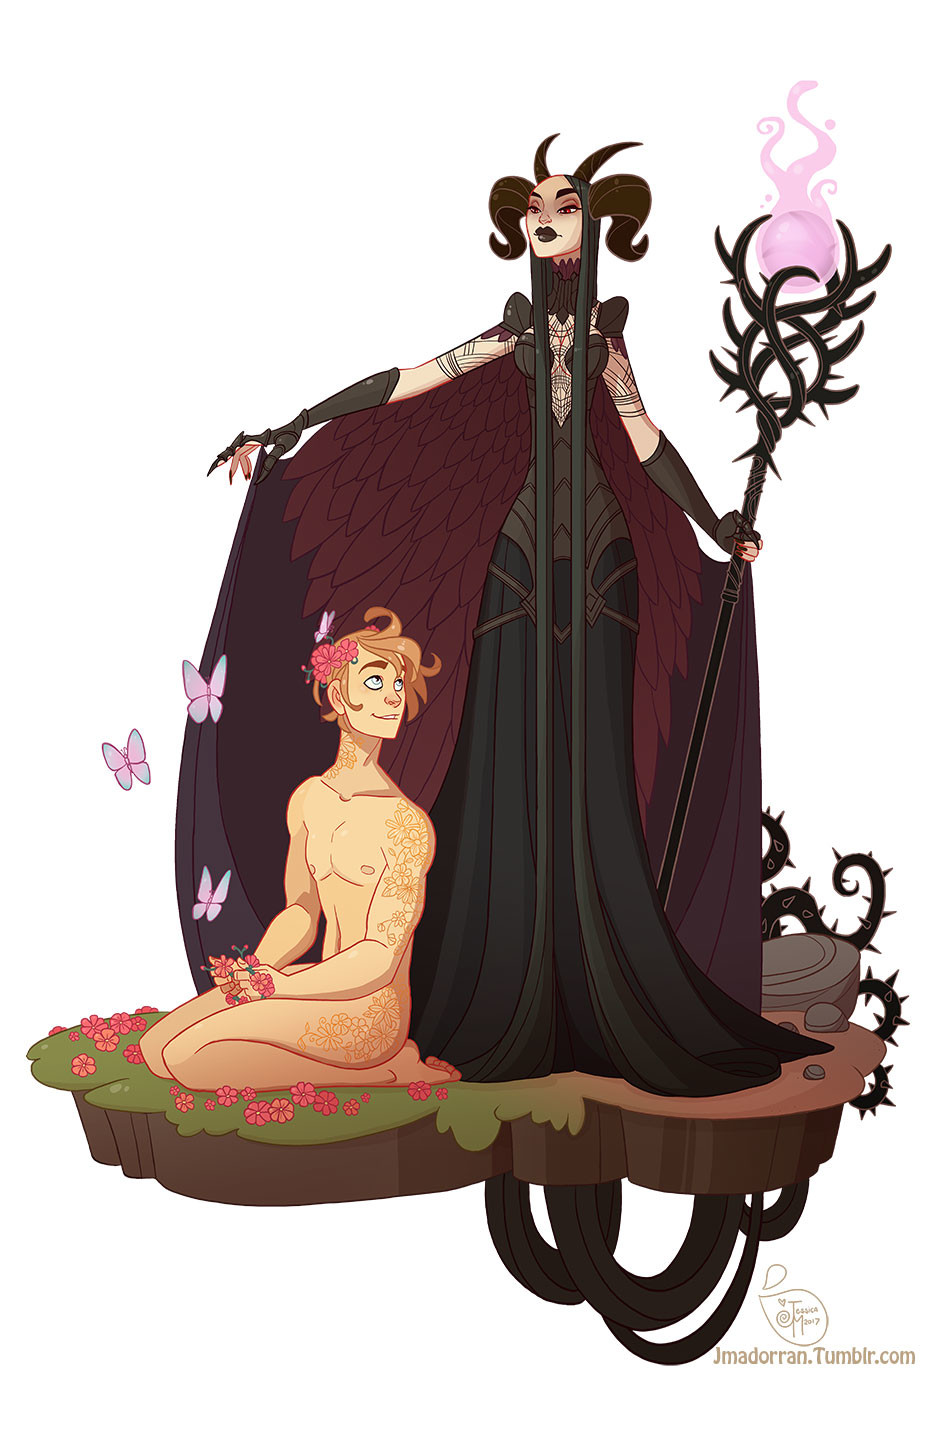 Commission - Hades and Persephone